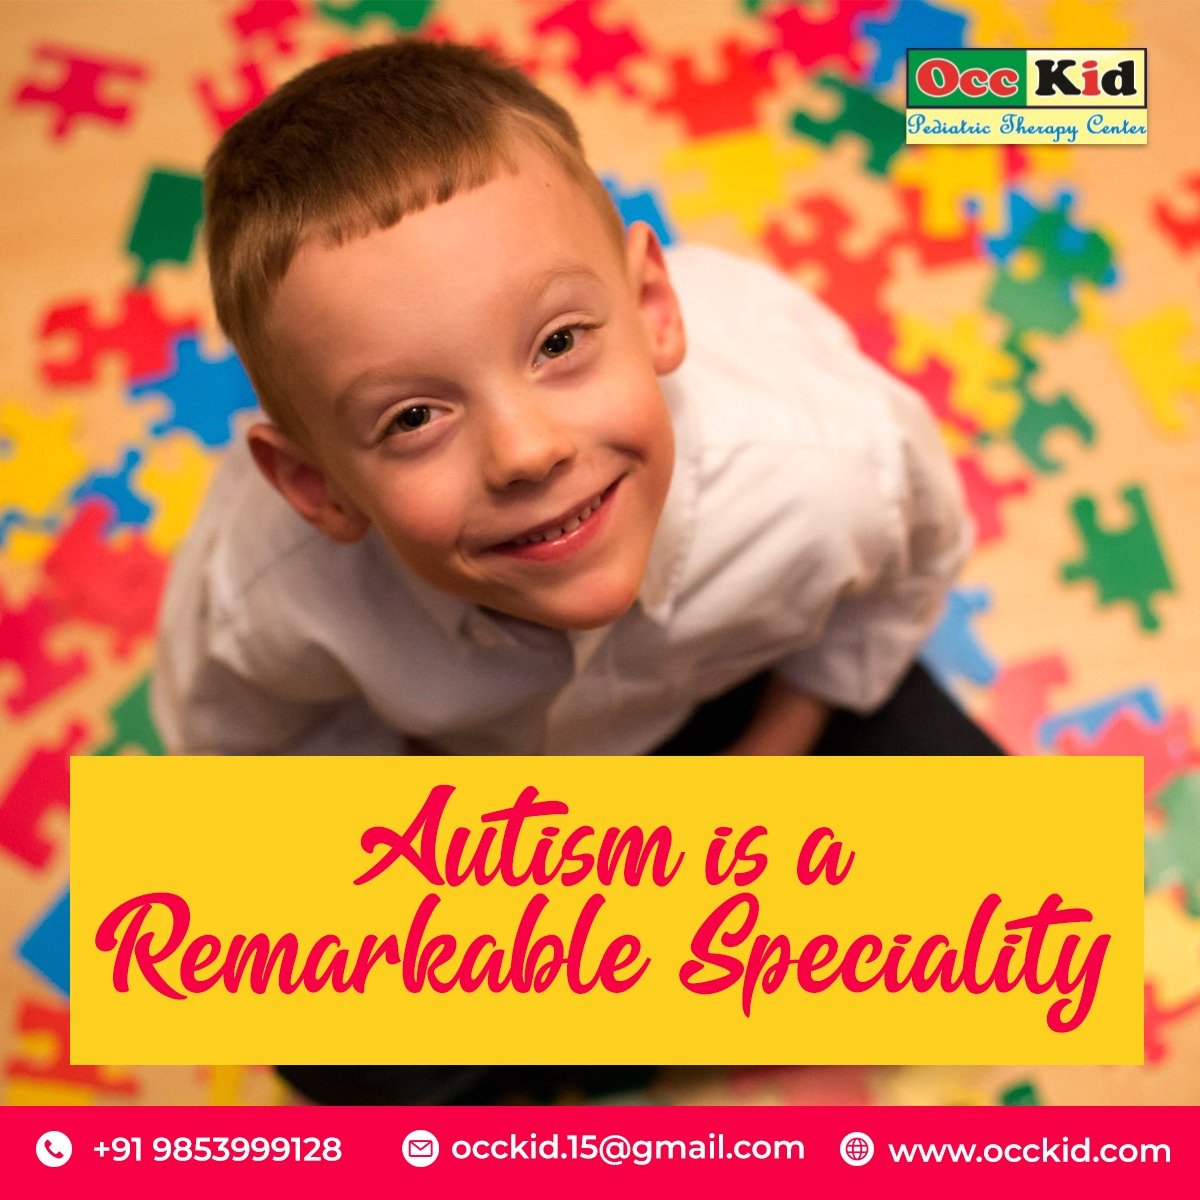 Autism is a Remarkable Speciality | OccKid Pediatric Therapy Center